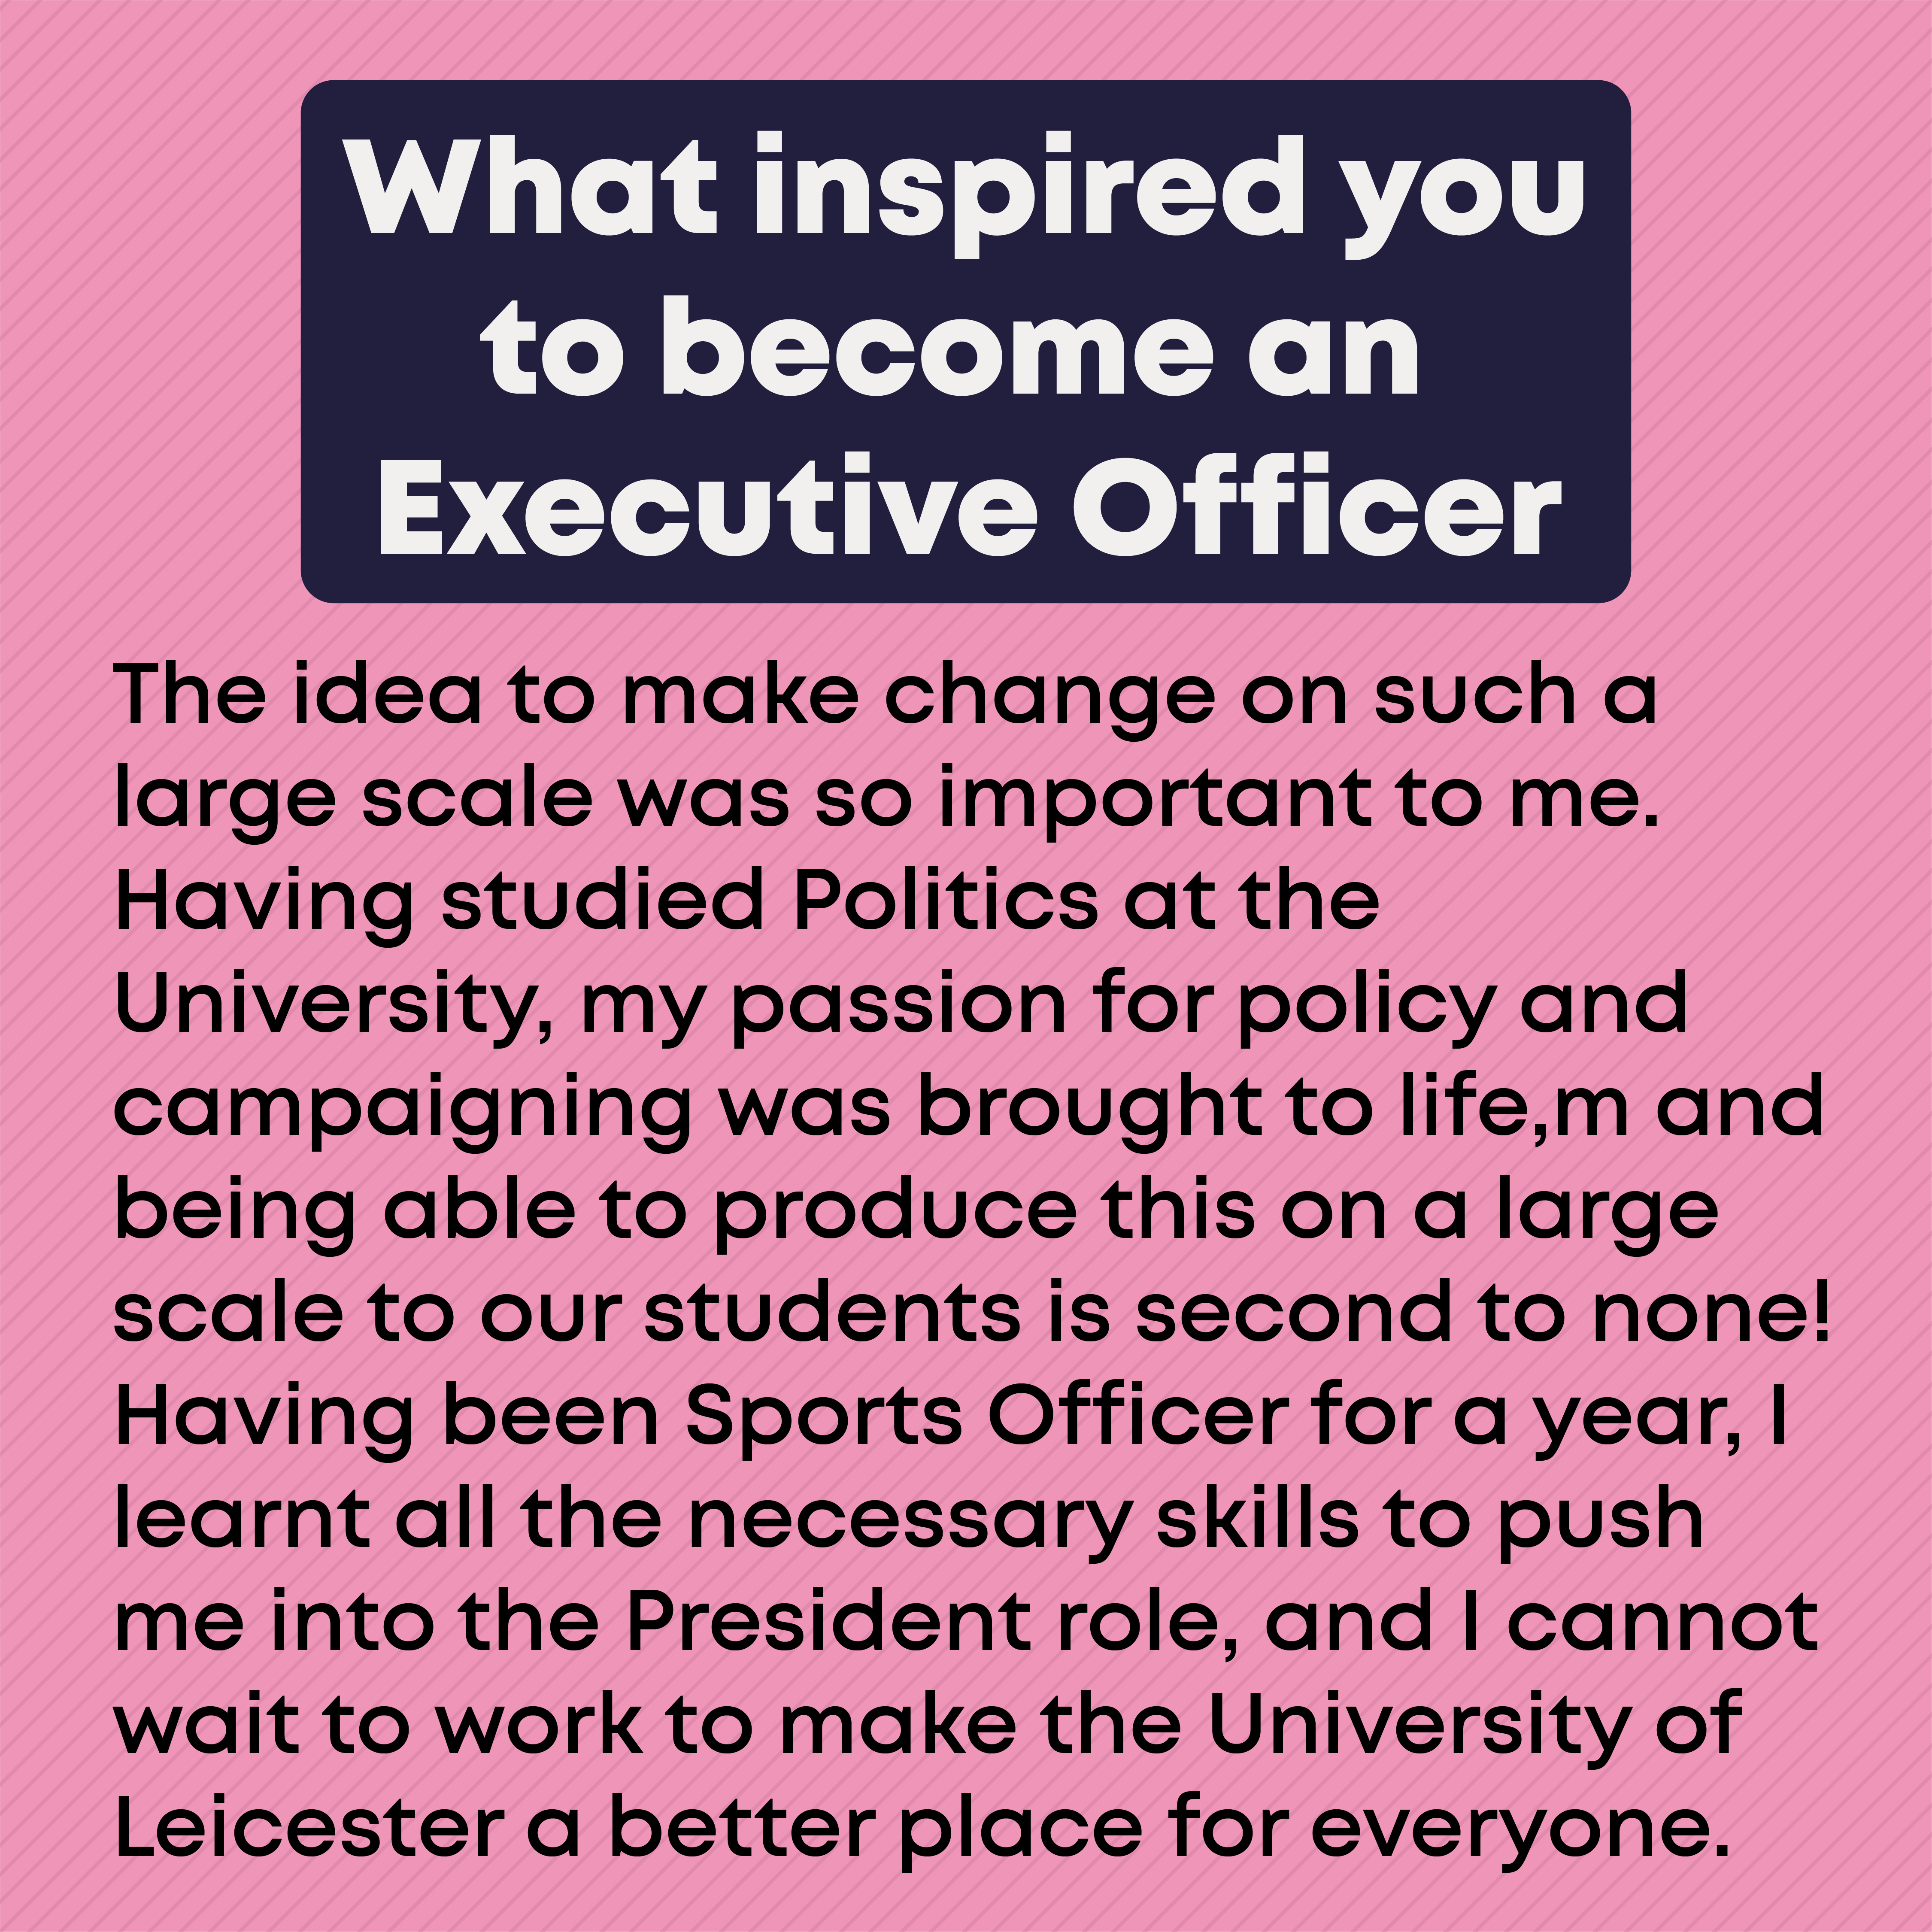 What inspired you to become an Executive Officer?: The idea to make change on such a large scale was so important to me. Having studied Politics at the University, my passion for policy and campaigning was brought to life,m and being able to produce this on a large scale to our students is second to none! Having been Sports Officer for a year, I learnt all the necessary skills to push me into the President role, and I cannot wait to work to make the University of Leicester a better place for everyone.